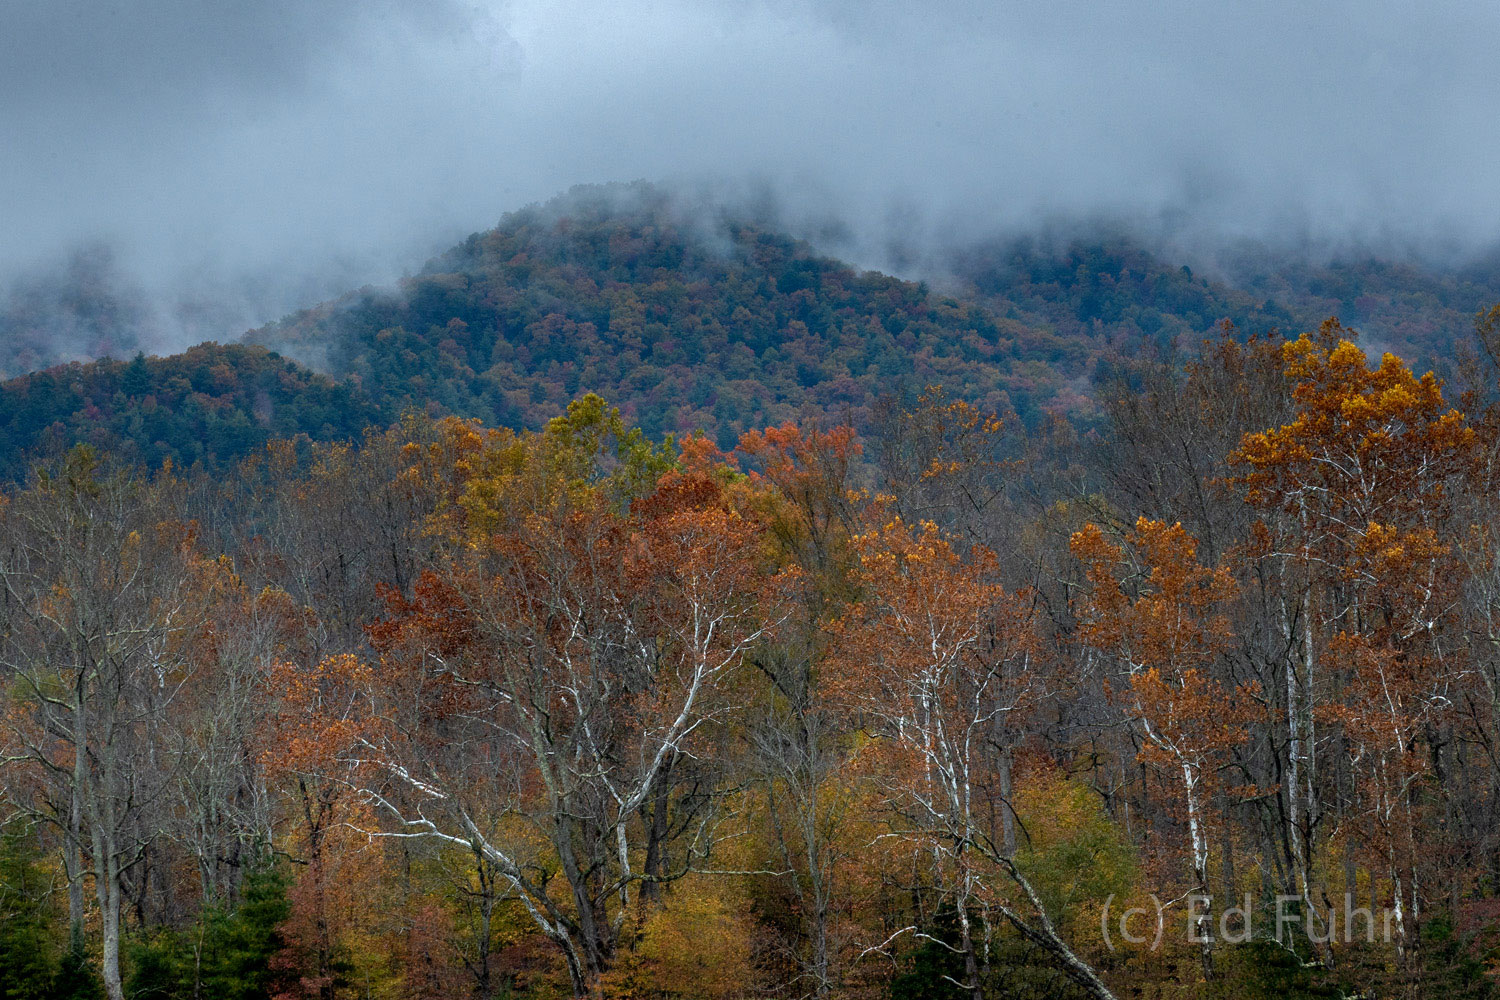 Darkening clouds rise above the mountain ridges in Cades Cove as fall's final colors begin to fade.